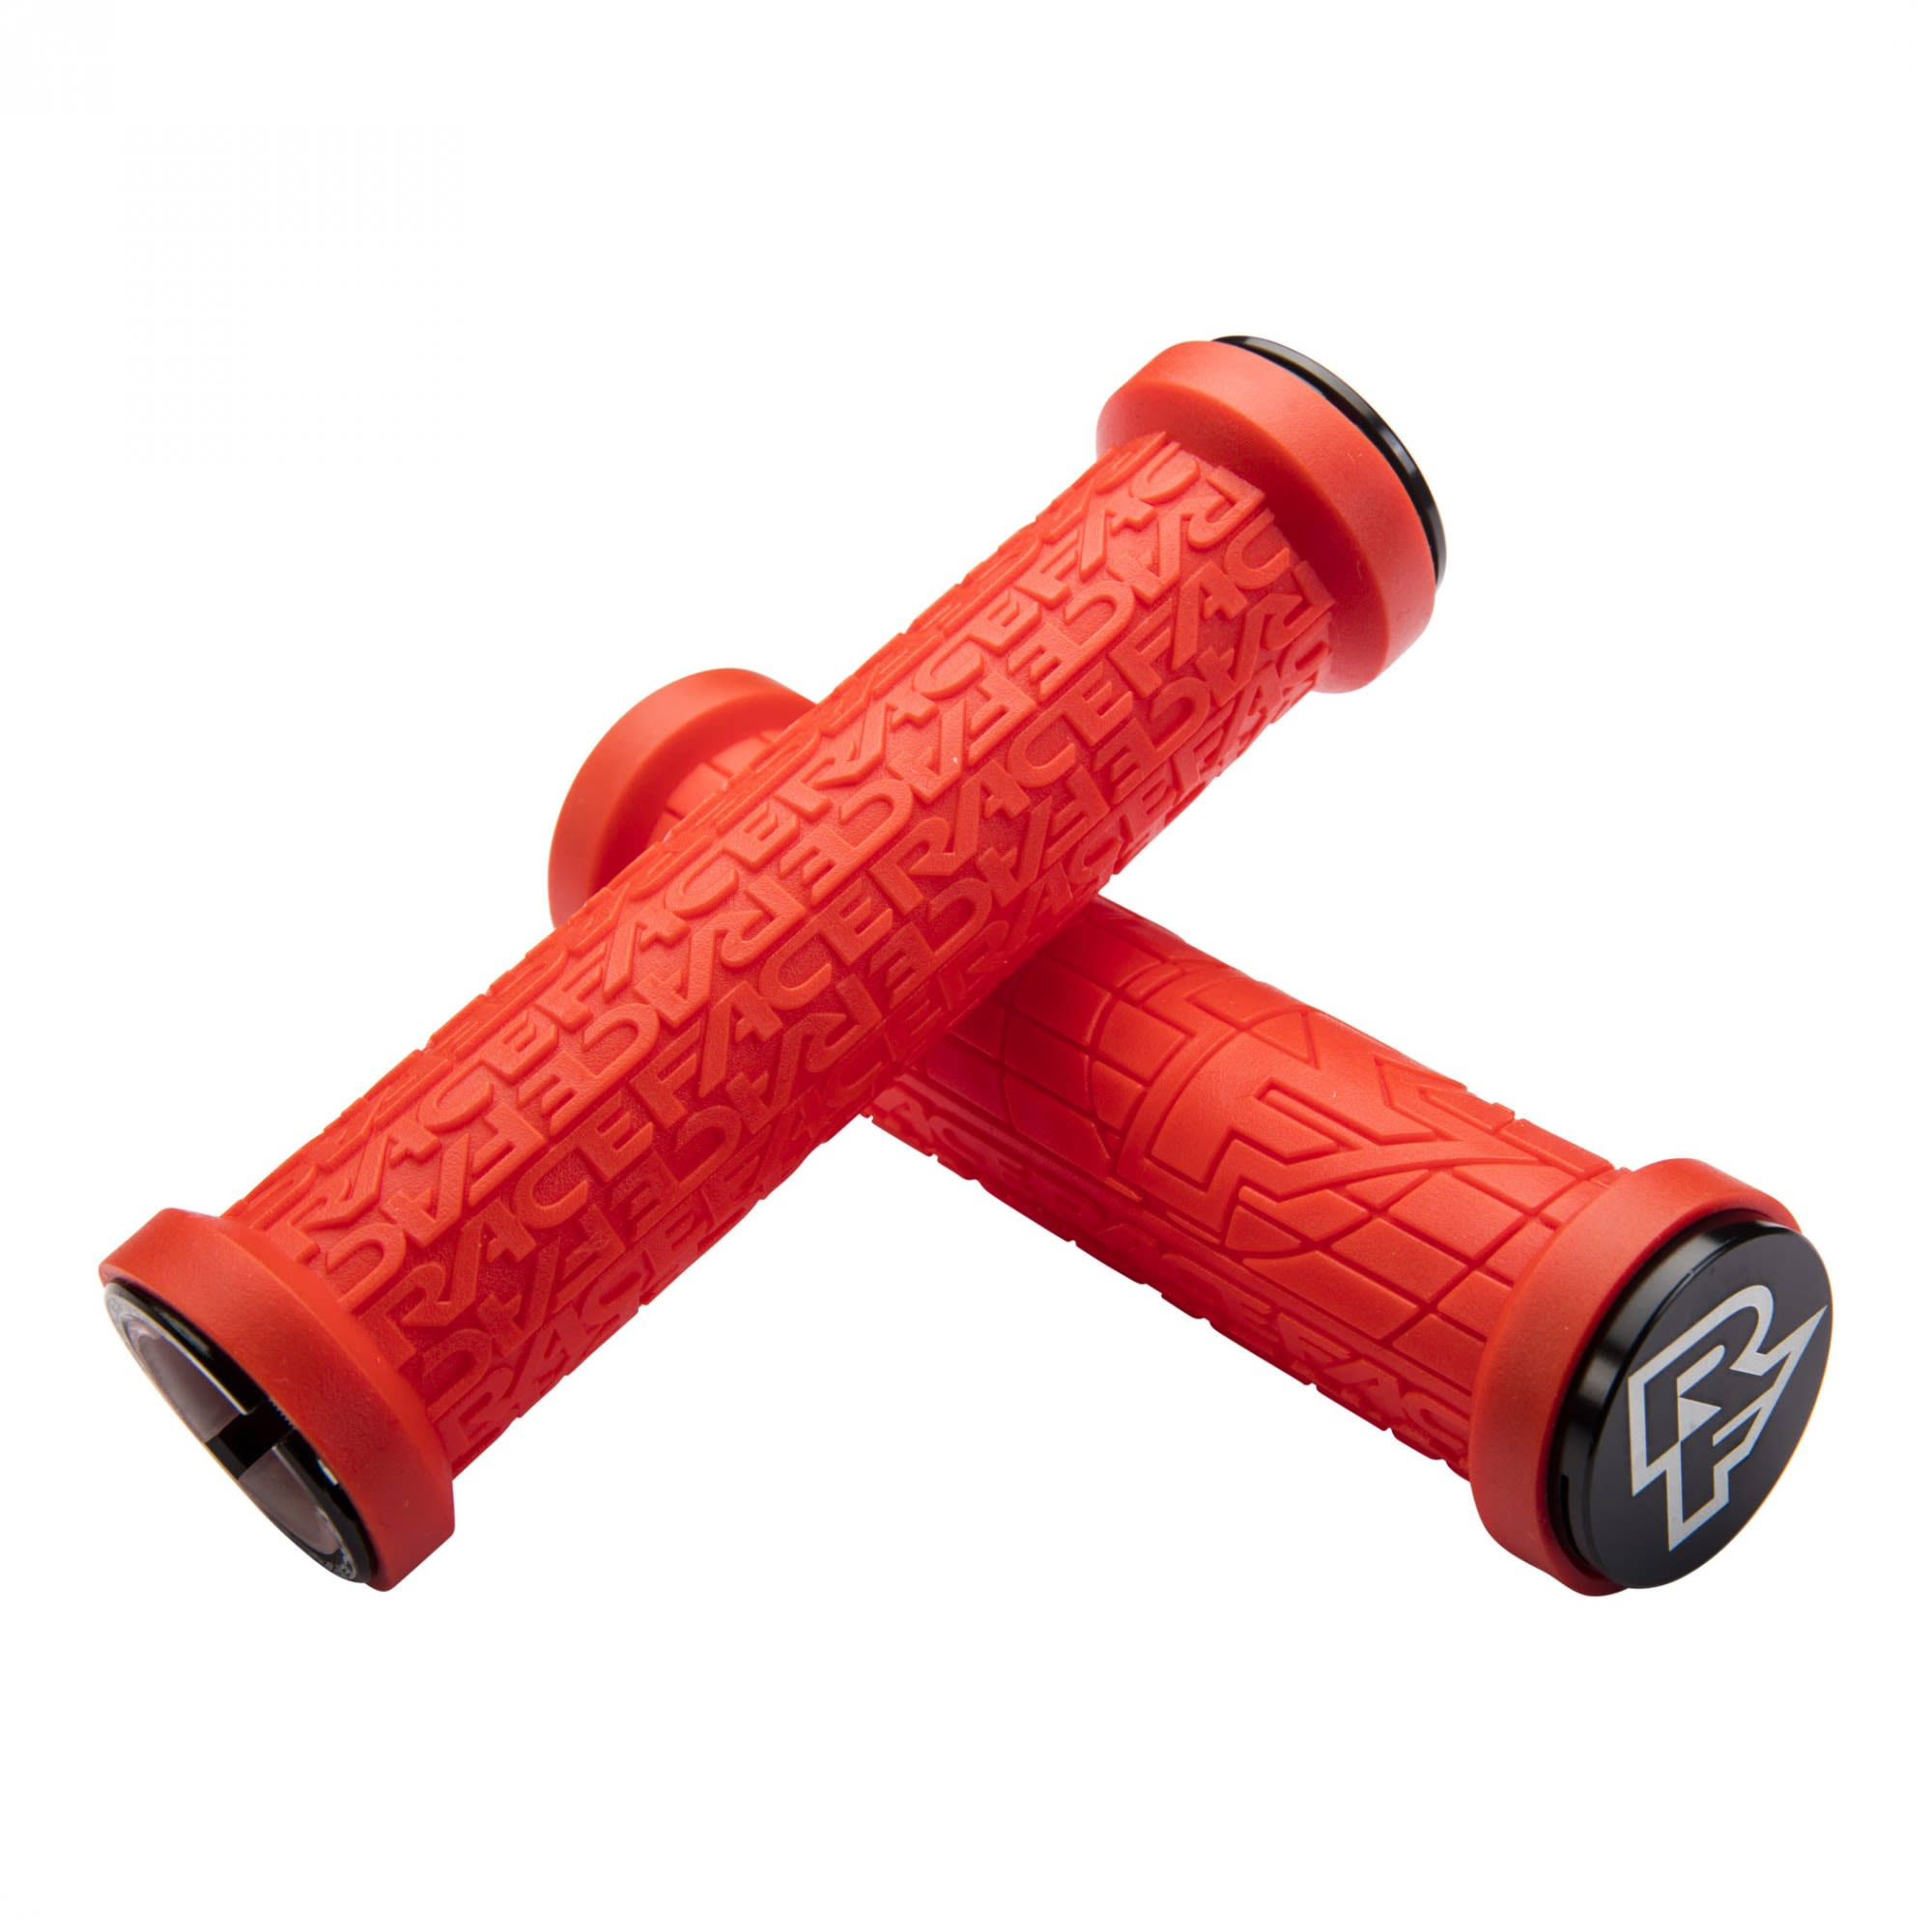 Raceface Grippler Lock-on Bicycle Grips - 30mm, Red